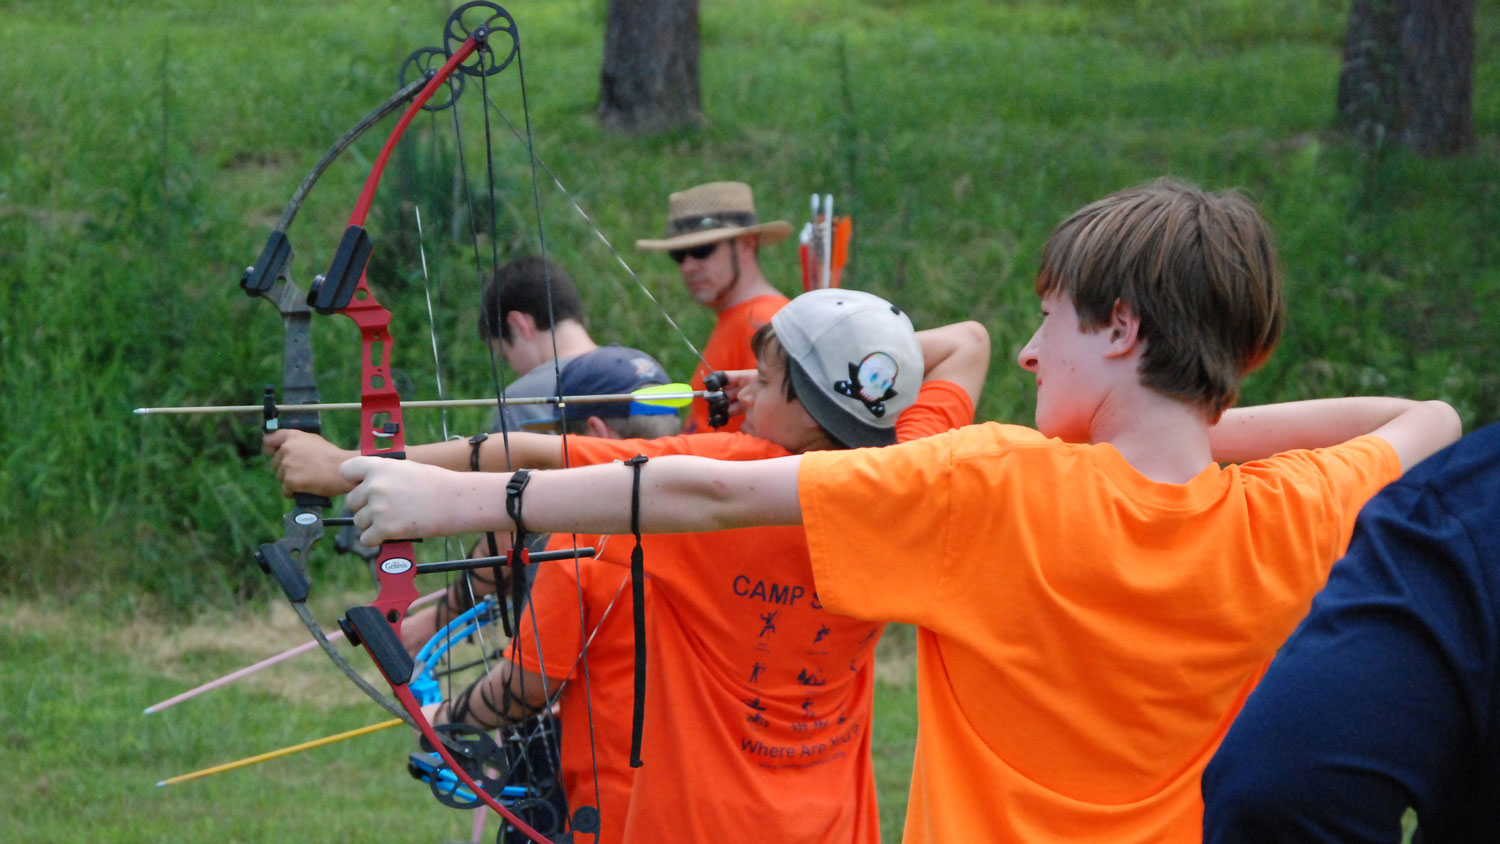 Archery at Camp Subiaco